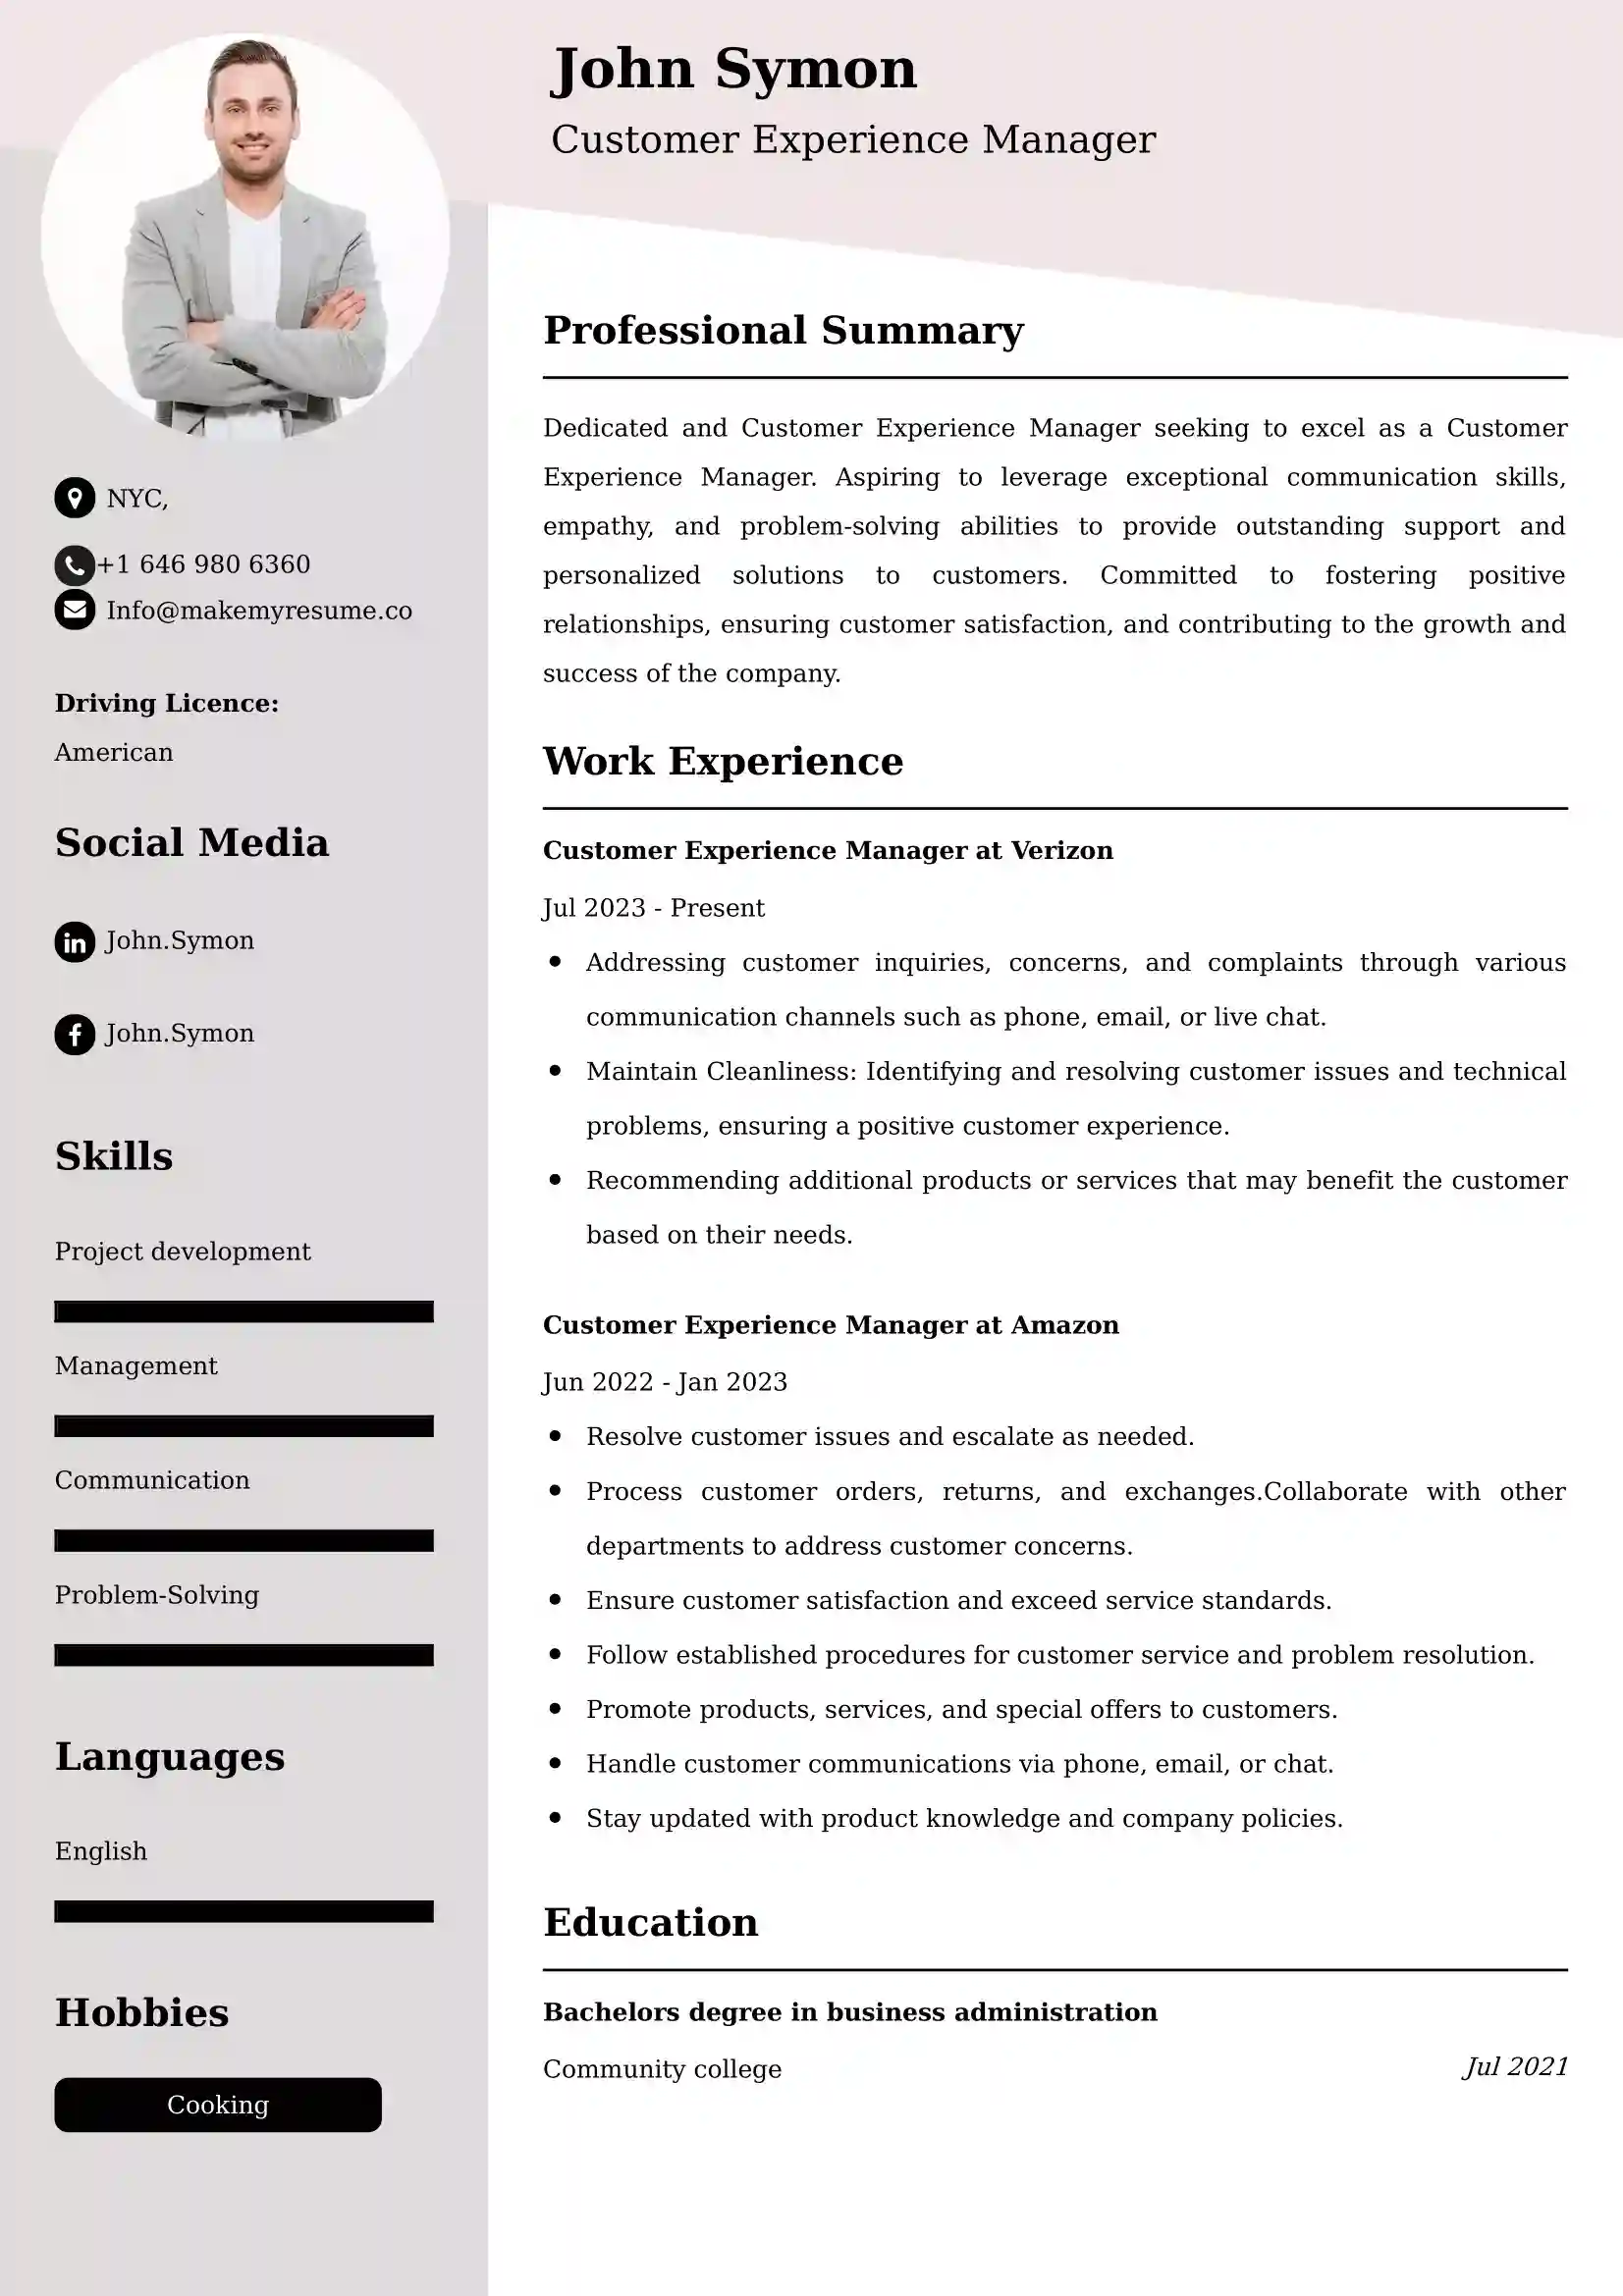 Customer Experience Manager CV Examples Malaysia